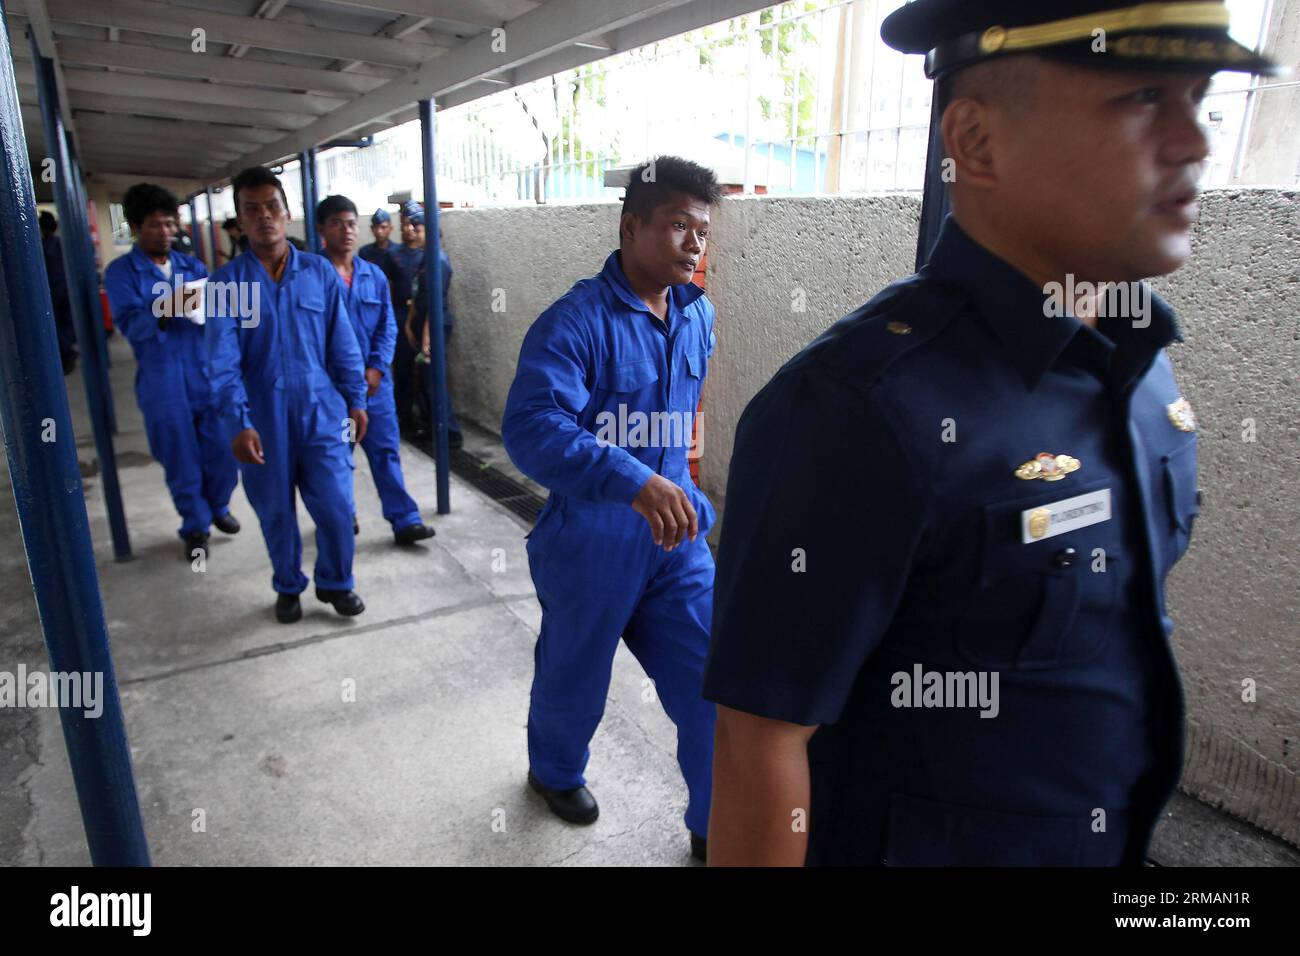 (140717) -- MANILA, July 17, 2014 (Xinhua) -- A member of the Philippine Coast Guard (PCG) leads the four rescued Filipino fishermen inside the PCG Headquarters in Manila, the Philippines, on July 17, 2014. The crew of Chinese vessel MV Pacific Pioneer, which came from Hong Kong of China, rescued the four Filipino fishermen who were in the sea for two days after their vessel was submerged in the strong wind brought by typhoon Rammasun. (Xinhua/Rouelle Umali) PHILIPPINES-MANILA-RESCUED FISHERMEN PUBLICATIONxNOTxINxCHN   Manila July 17 2014 XINHUA a member of The Philippine Coast Guard PCG leads Stock Photo